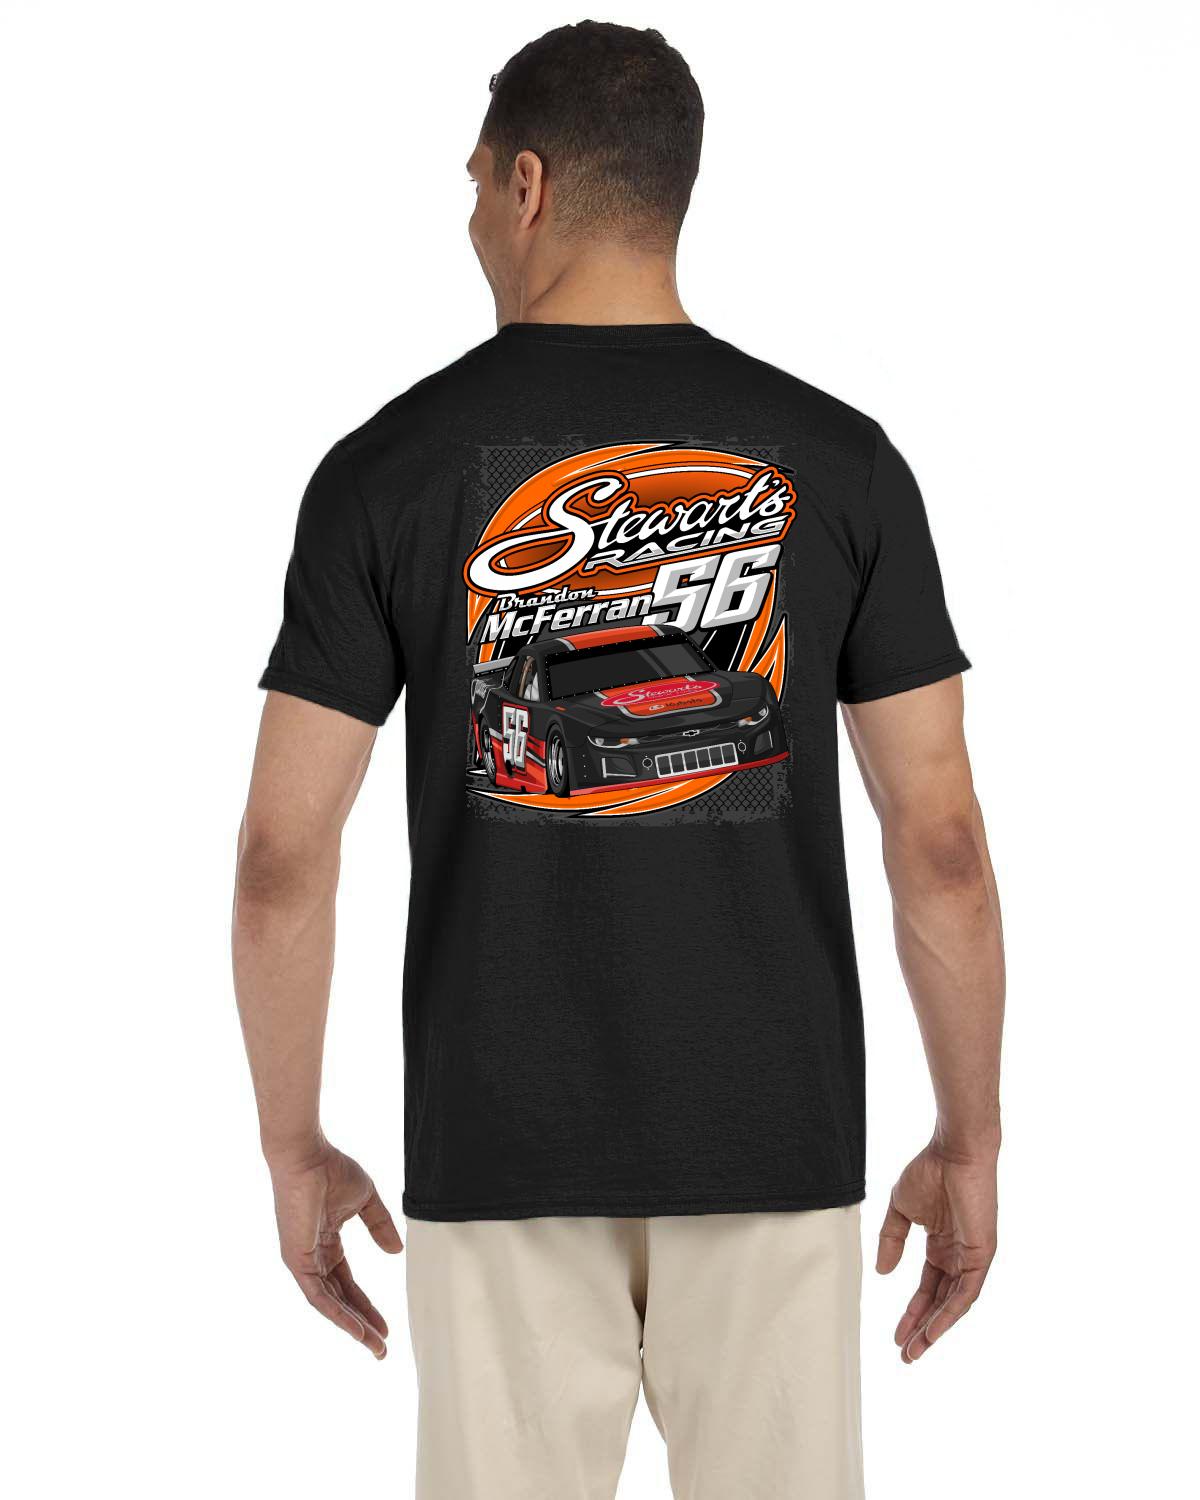 Stewart's Racing Soft Style Adult's Tshirt